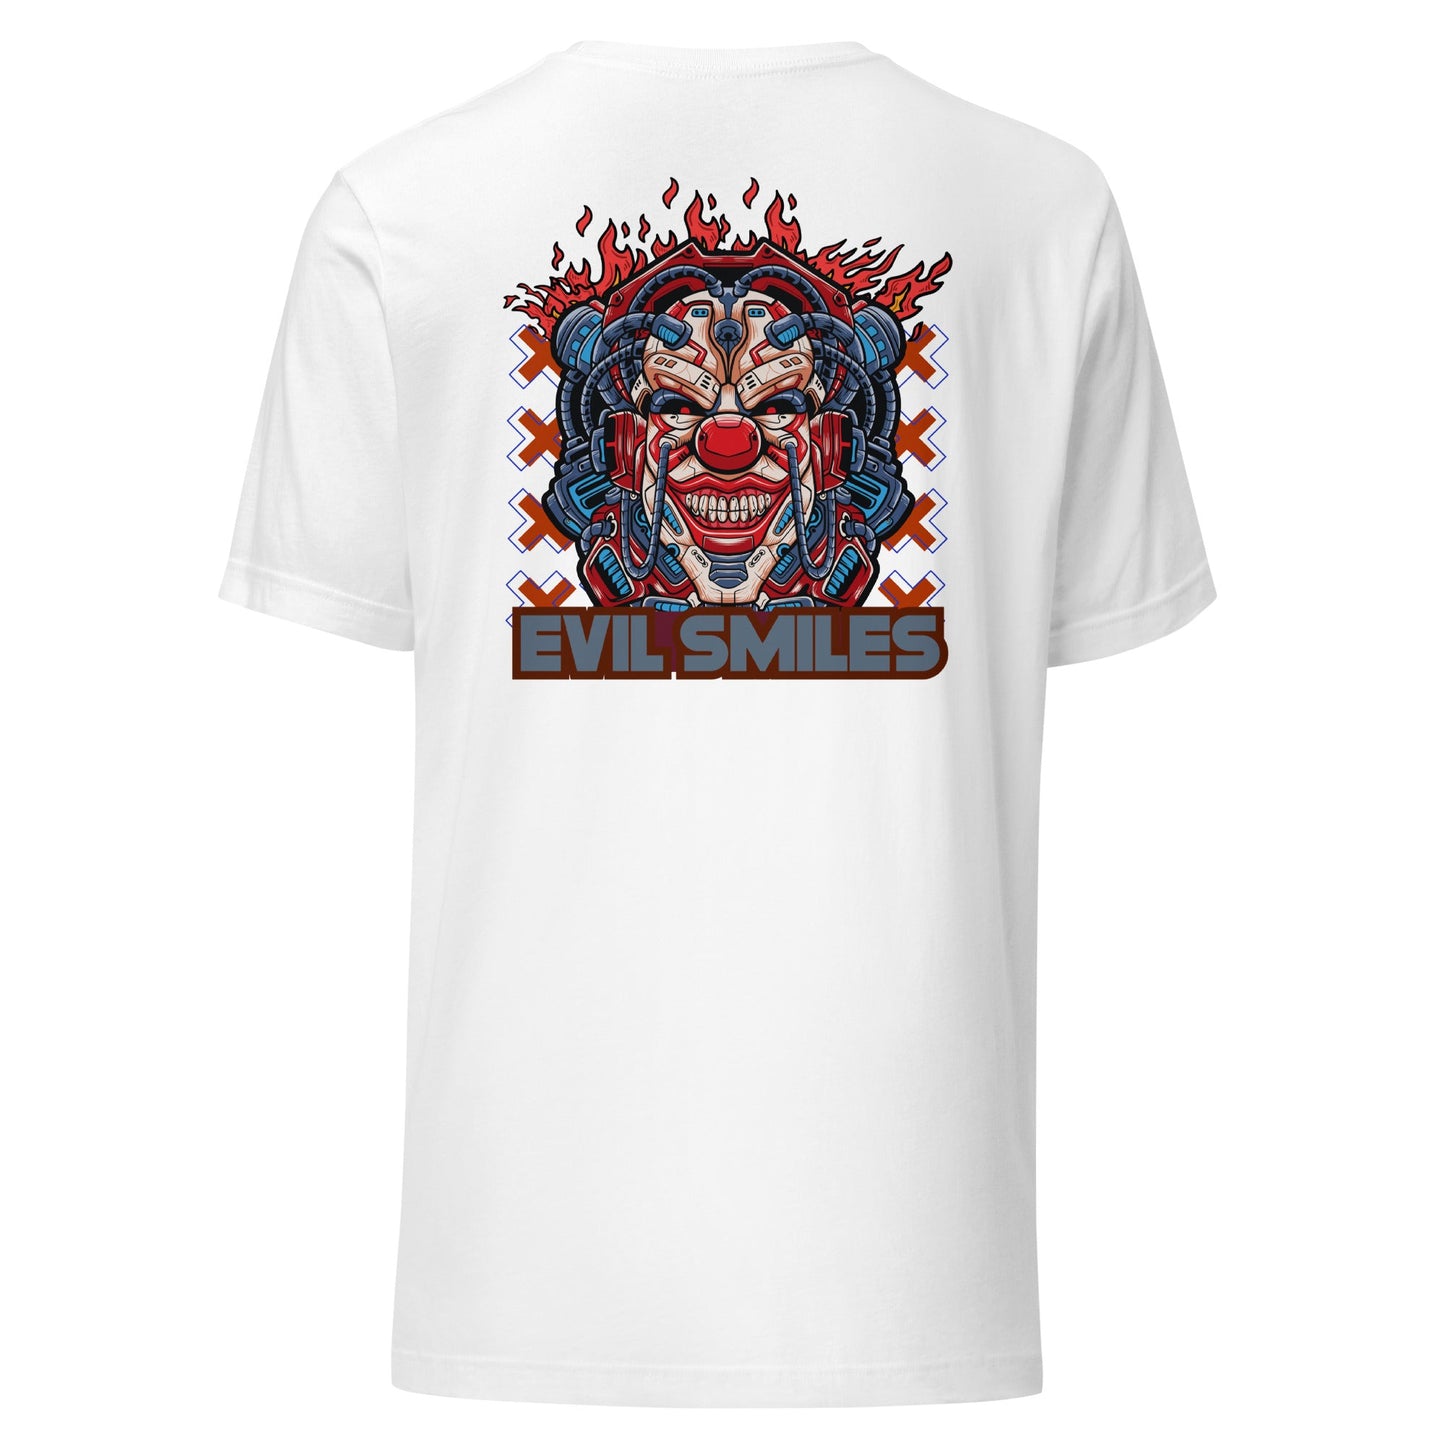 Sinister Grin Clown Tee | Evil Smile Circus T-Shirt | Playful & Mysterious | Unisex